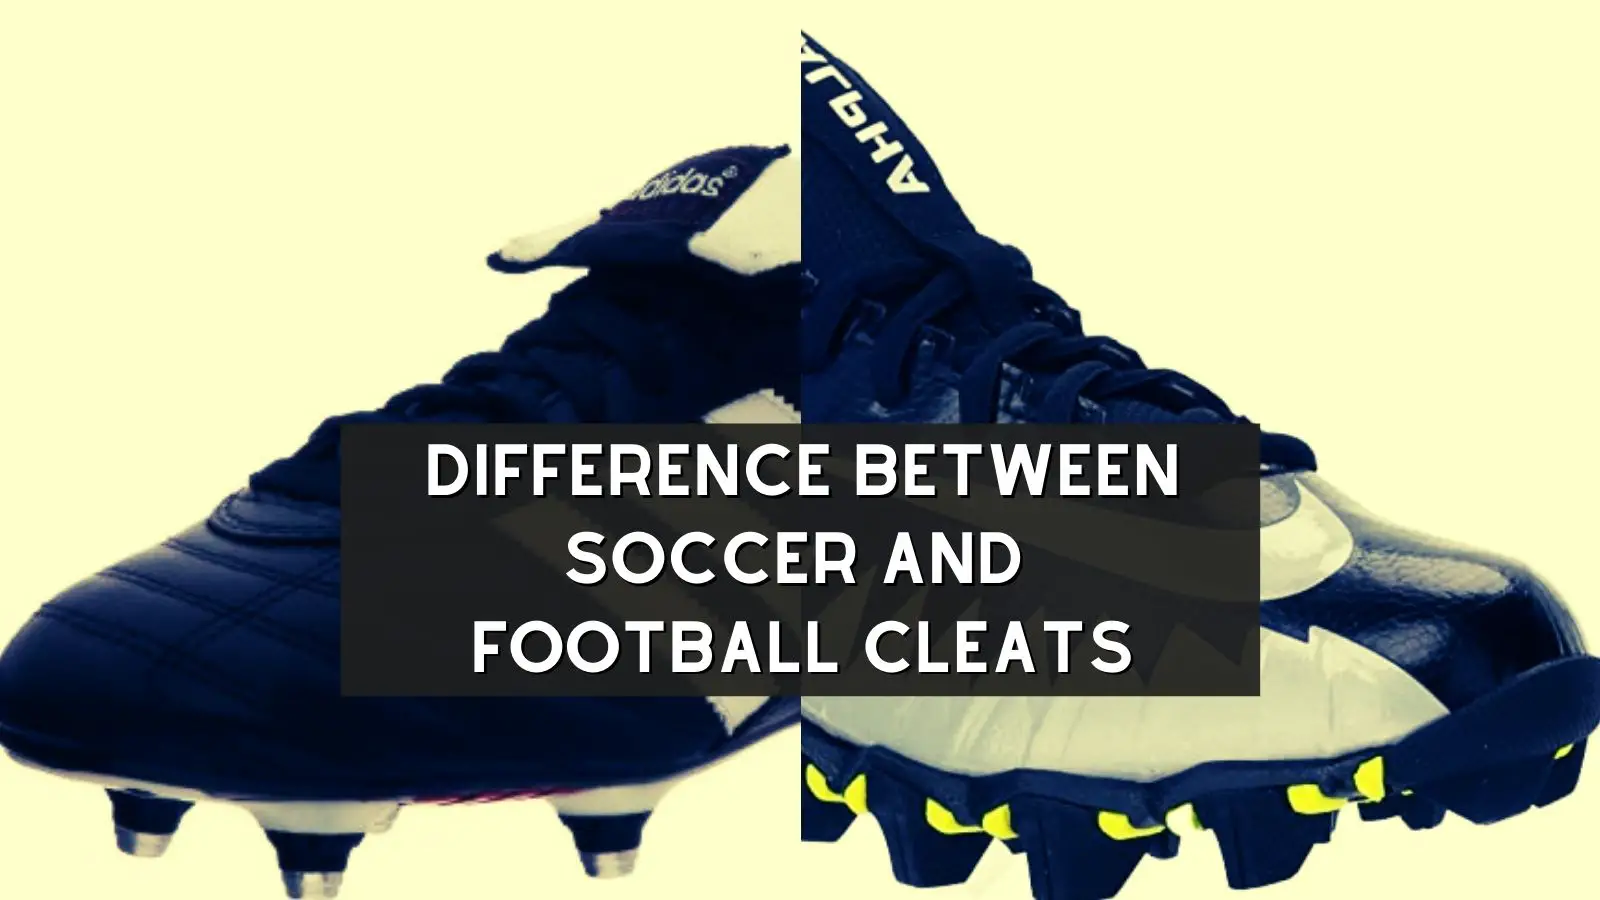 What Is The Difference Between Soccer And Football Cleats?